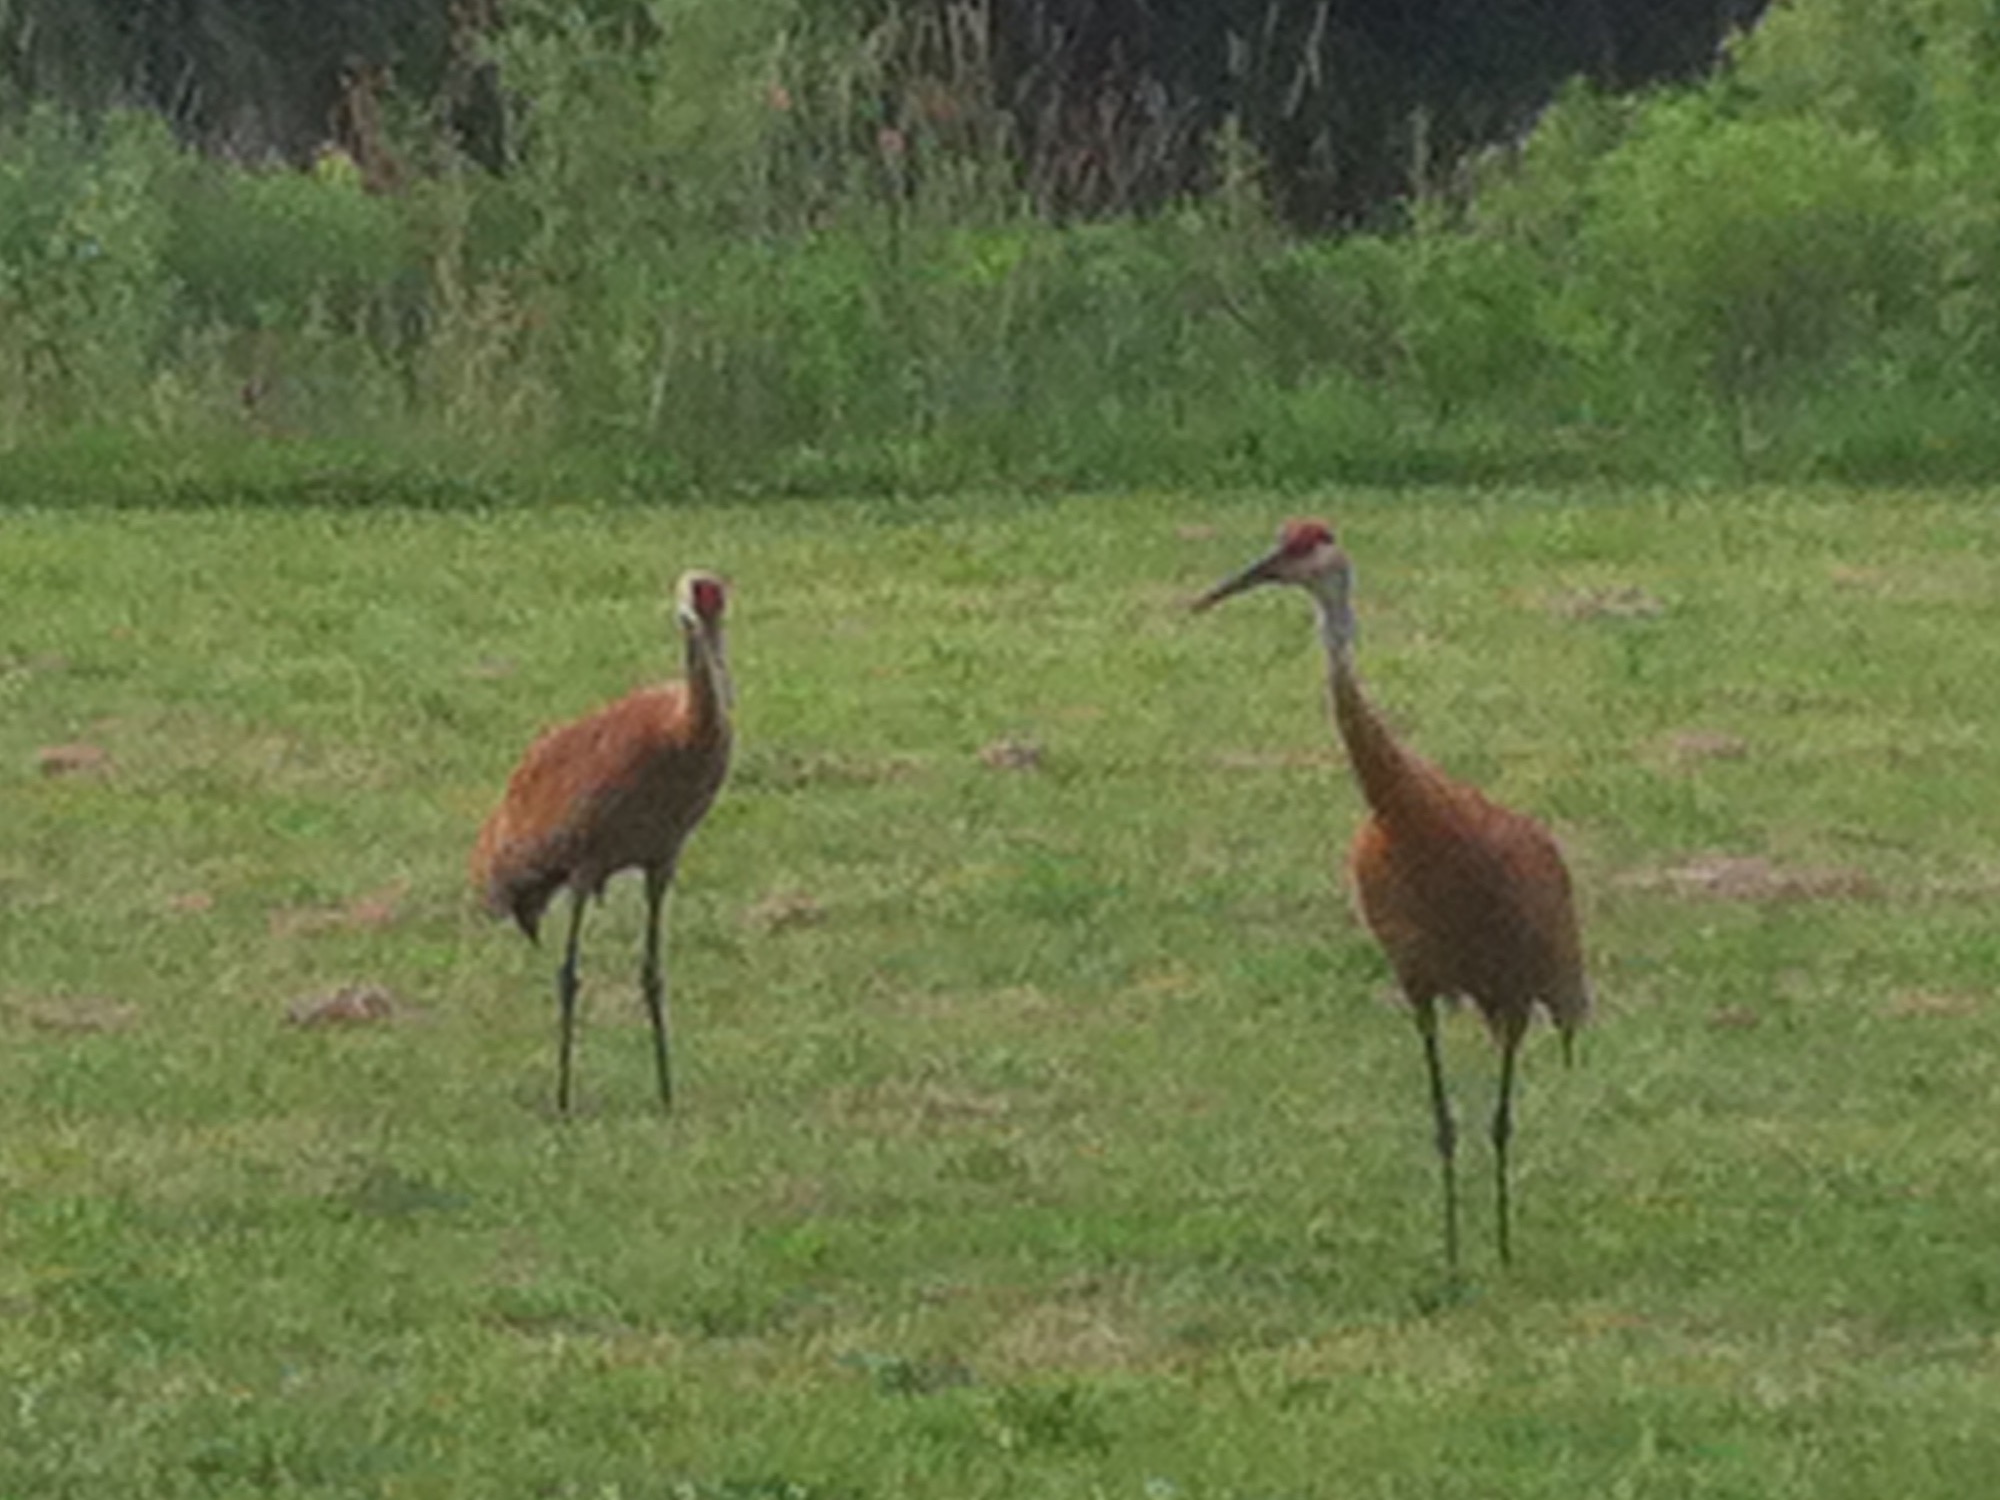 Sandhill Cranes at Marion-Dunn retention pond and prairie on June 20, 2016.